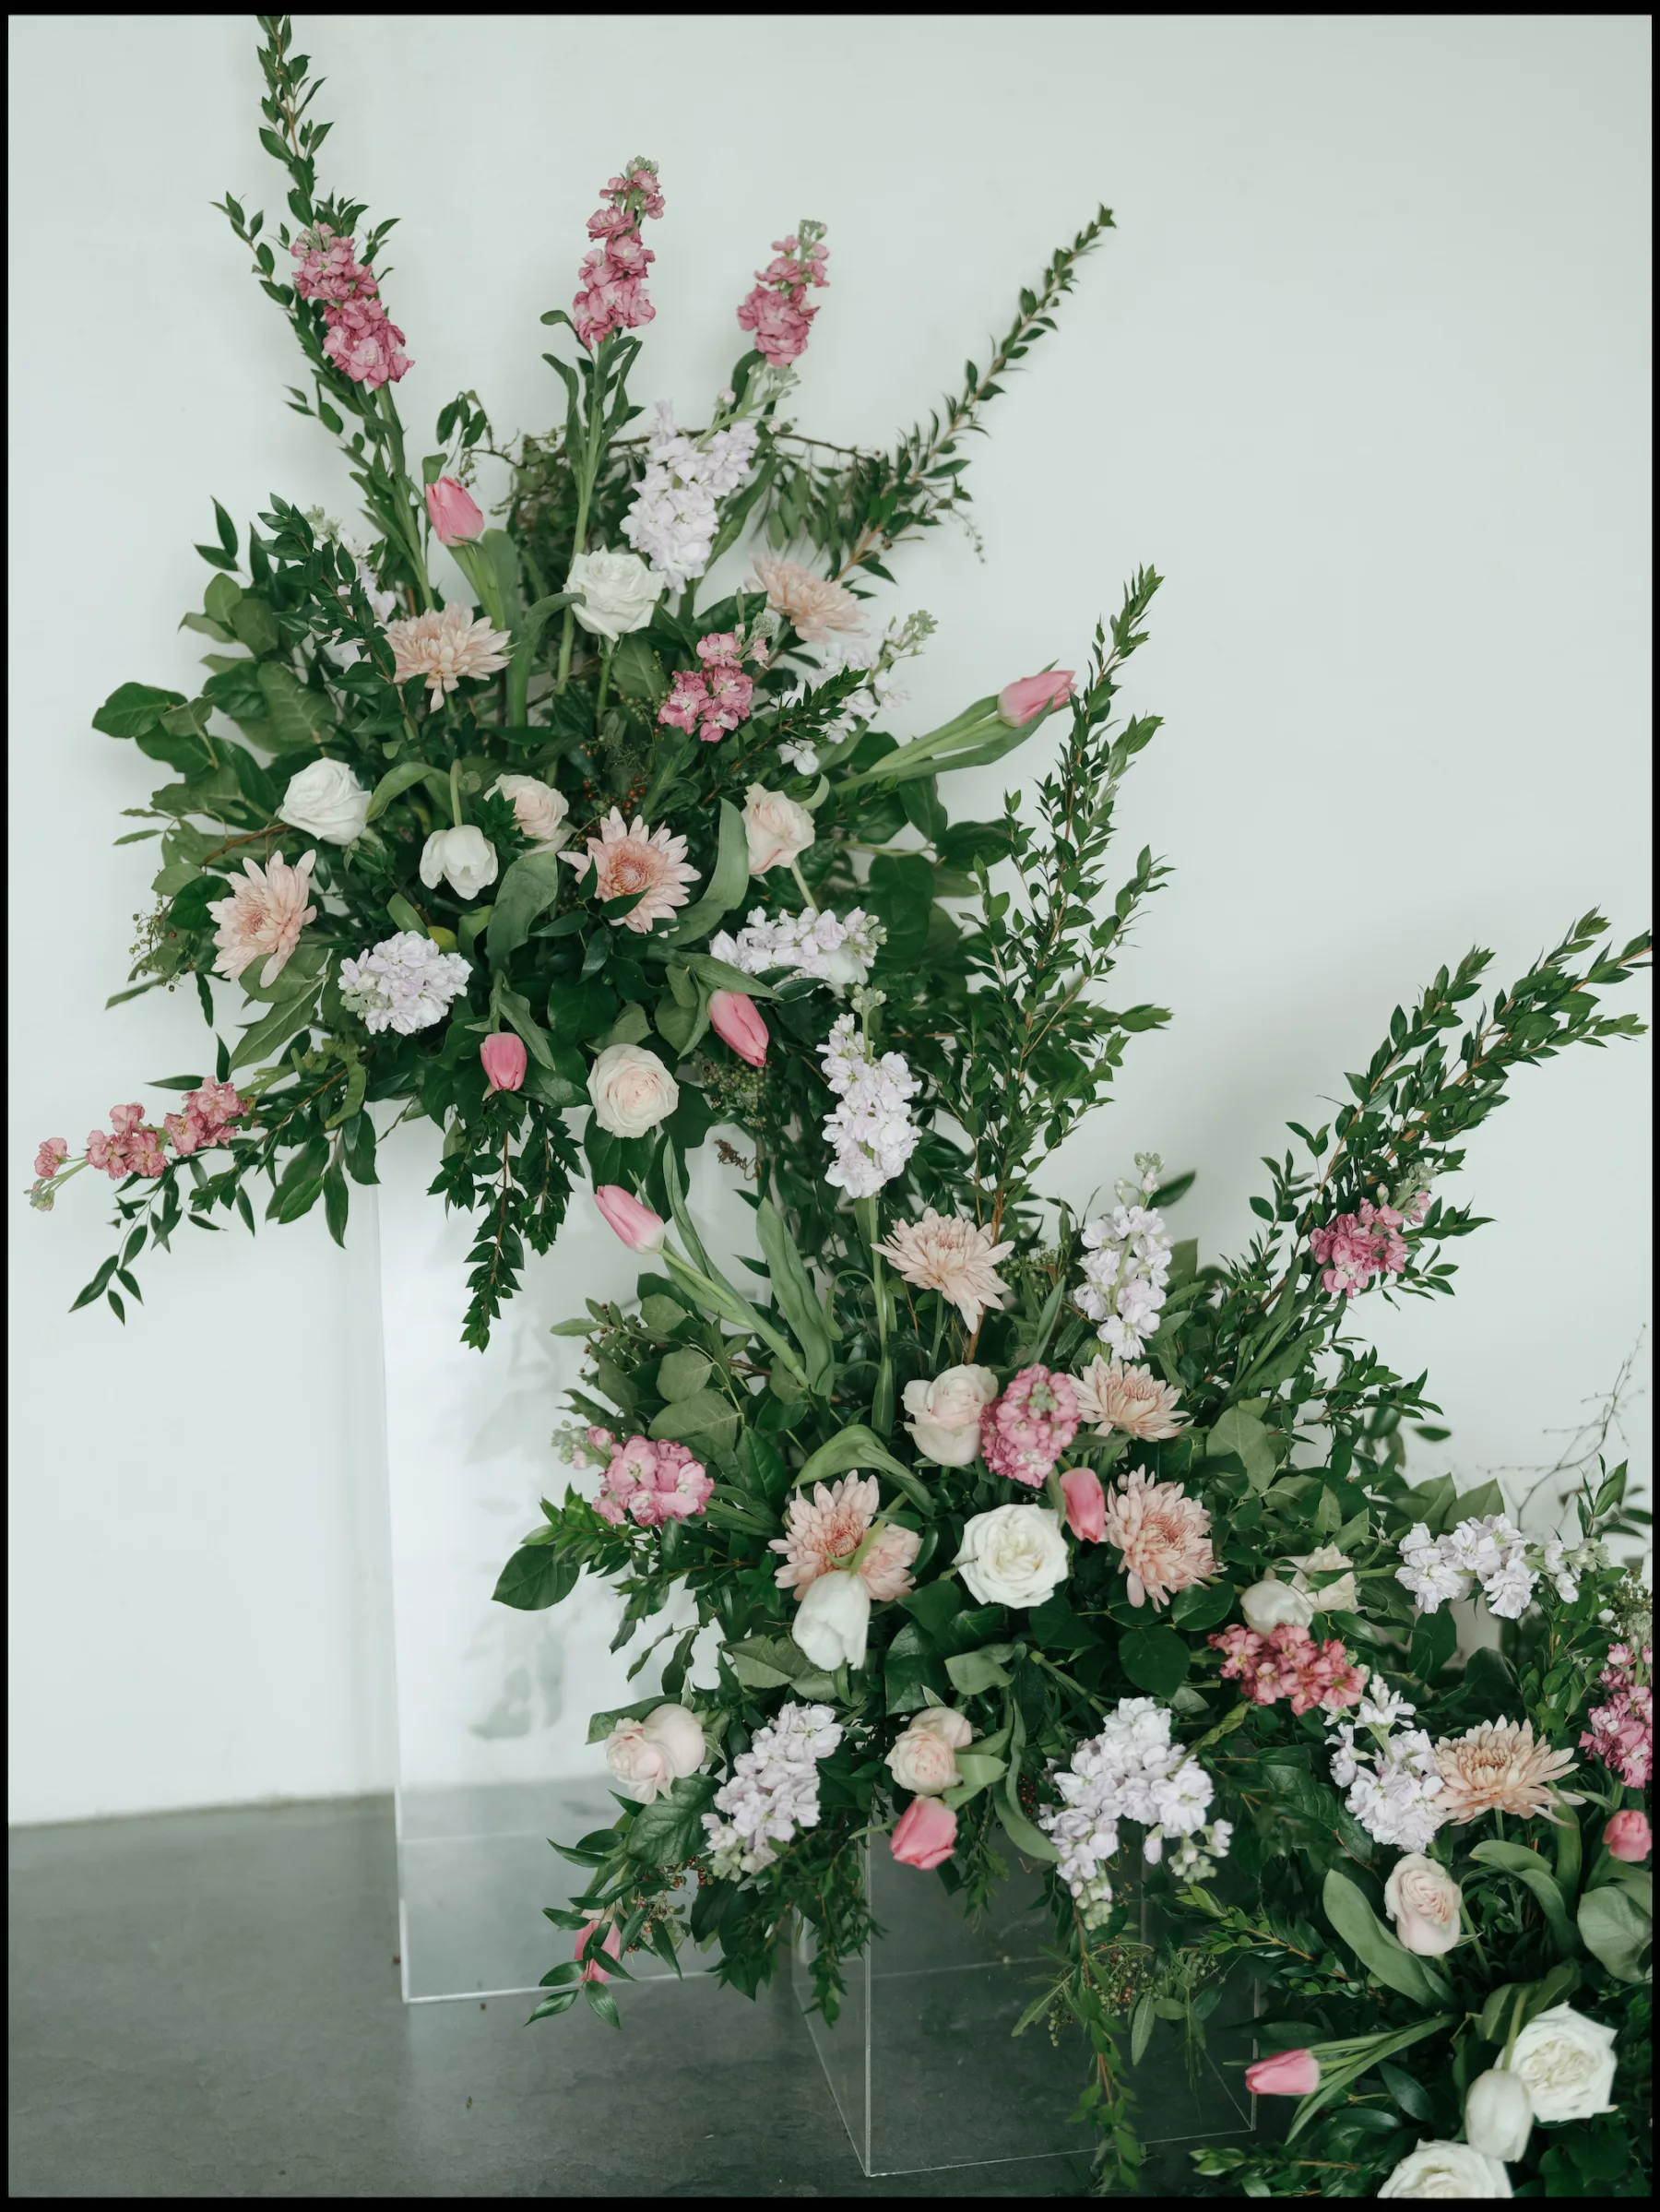 Whimsical Pink and White Roses, Chrysanthemums, Tulips, and Greenery Floral Arrangement Wedding Ceremony Backdrop Inspiration | Tampa Bay Florist Save The Date Florida